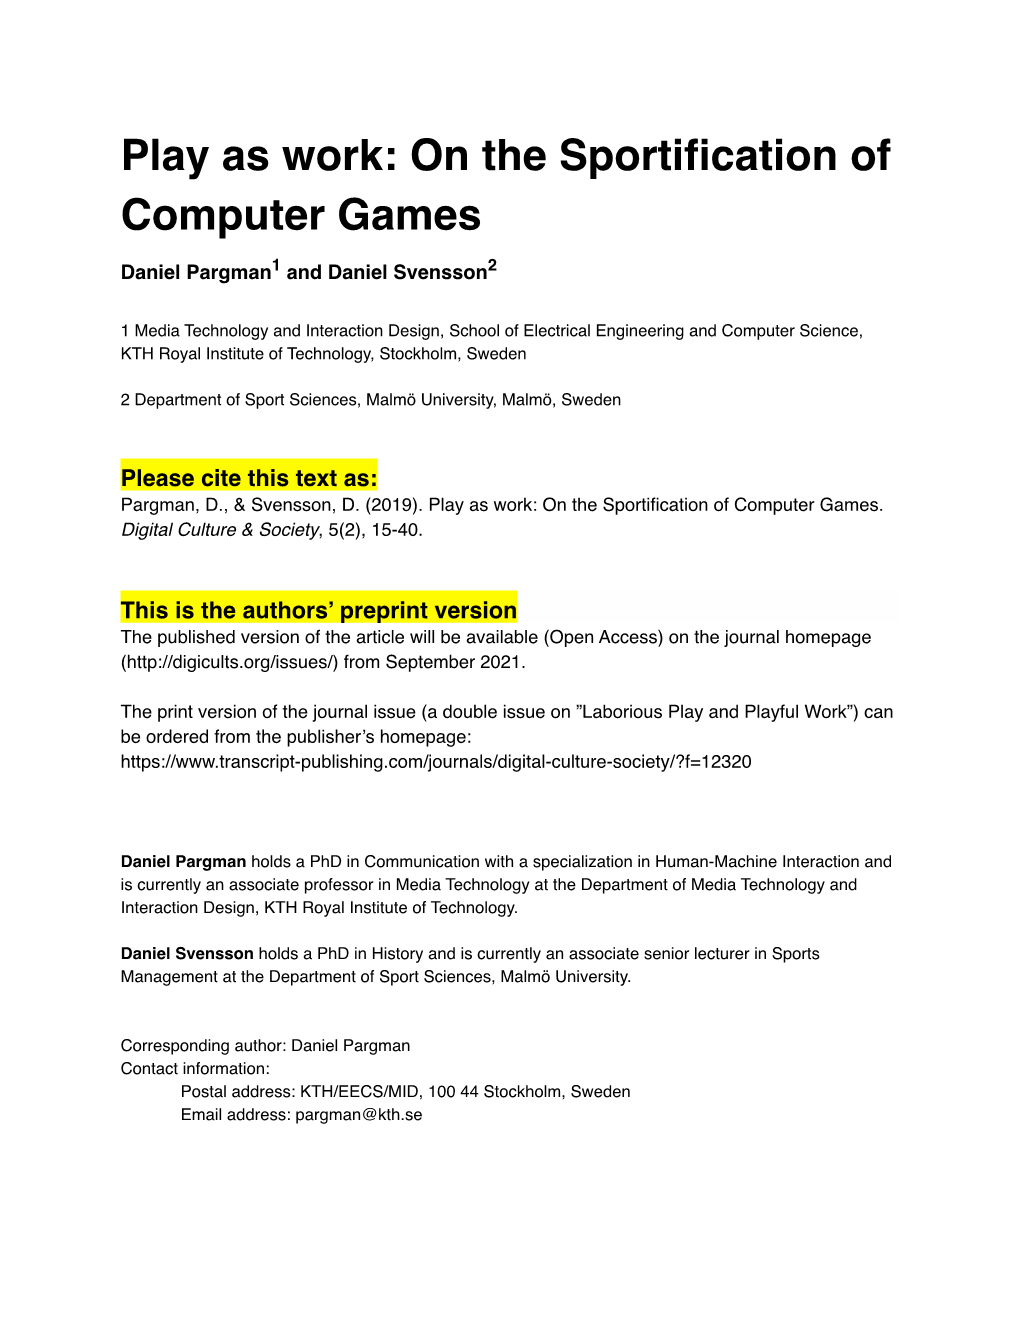 Play As Work: on the Sportification of Computer Games